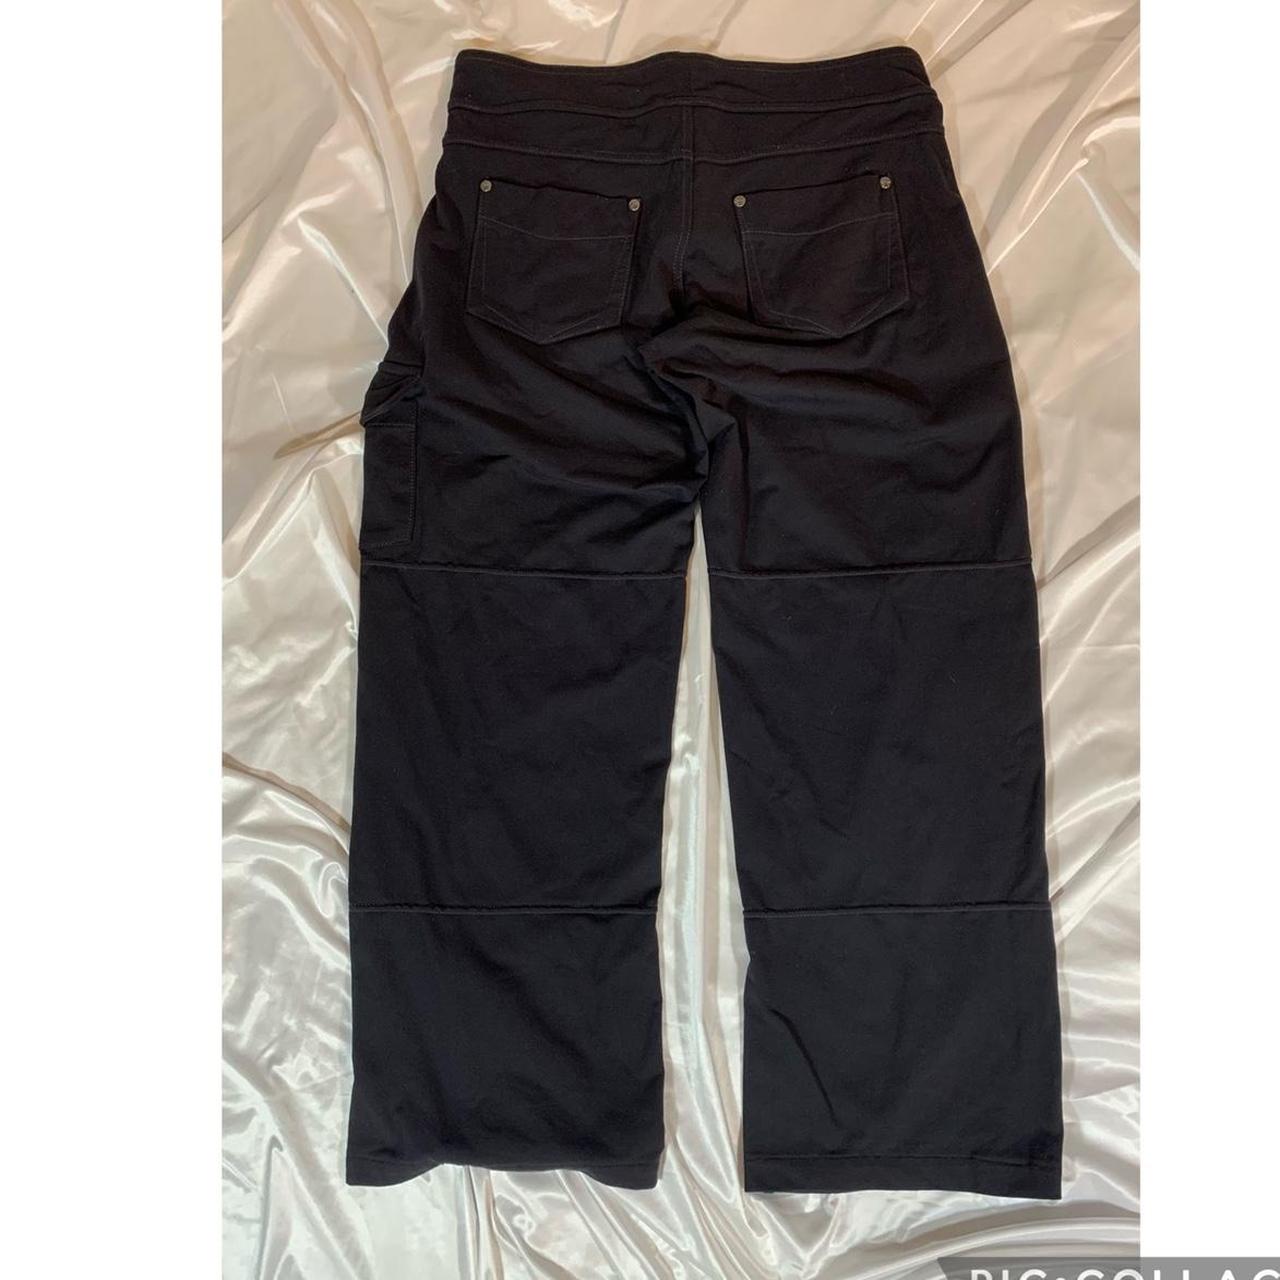 Product Image 4 - Black low rise cargo pants(b1)
Wide